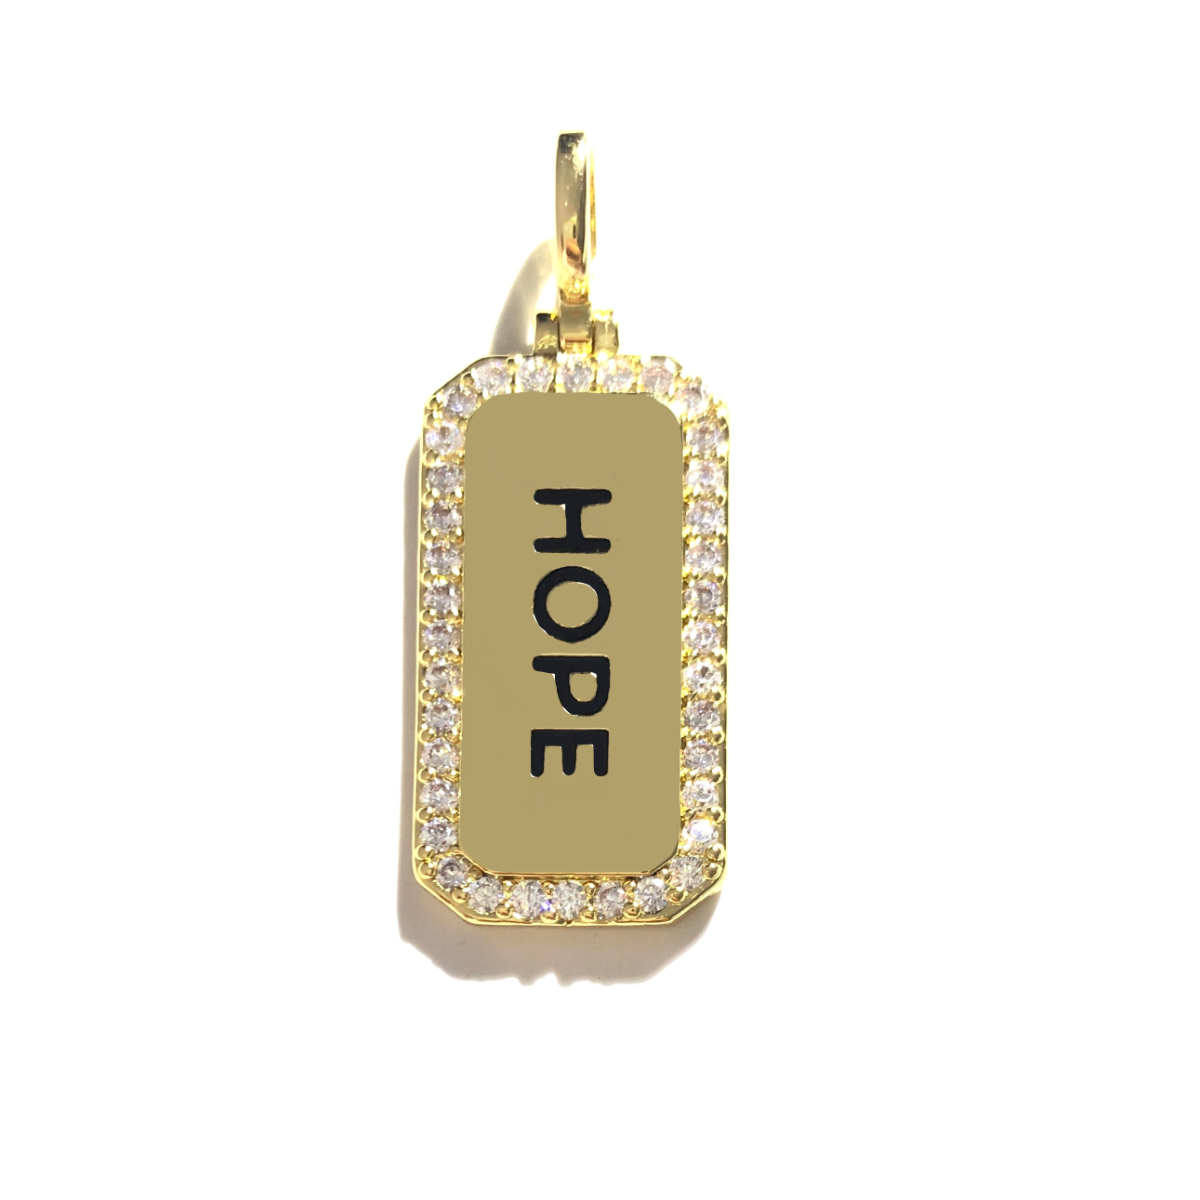 10pcs/lot 38*15mm CZ Paved Hope Word Tags Charms Pendants Gold CZ Paved Charms Christian Quotes New Charms Arrivals Word Tags Charms Beads Beyond